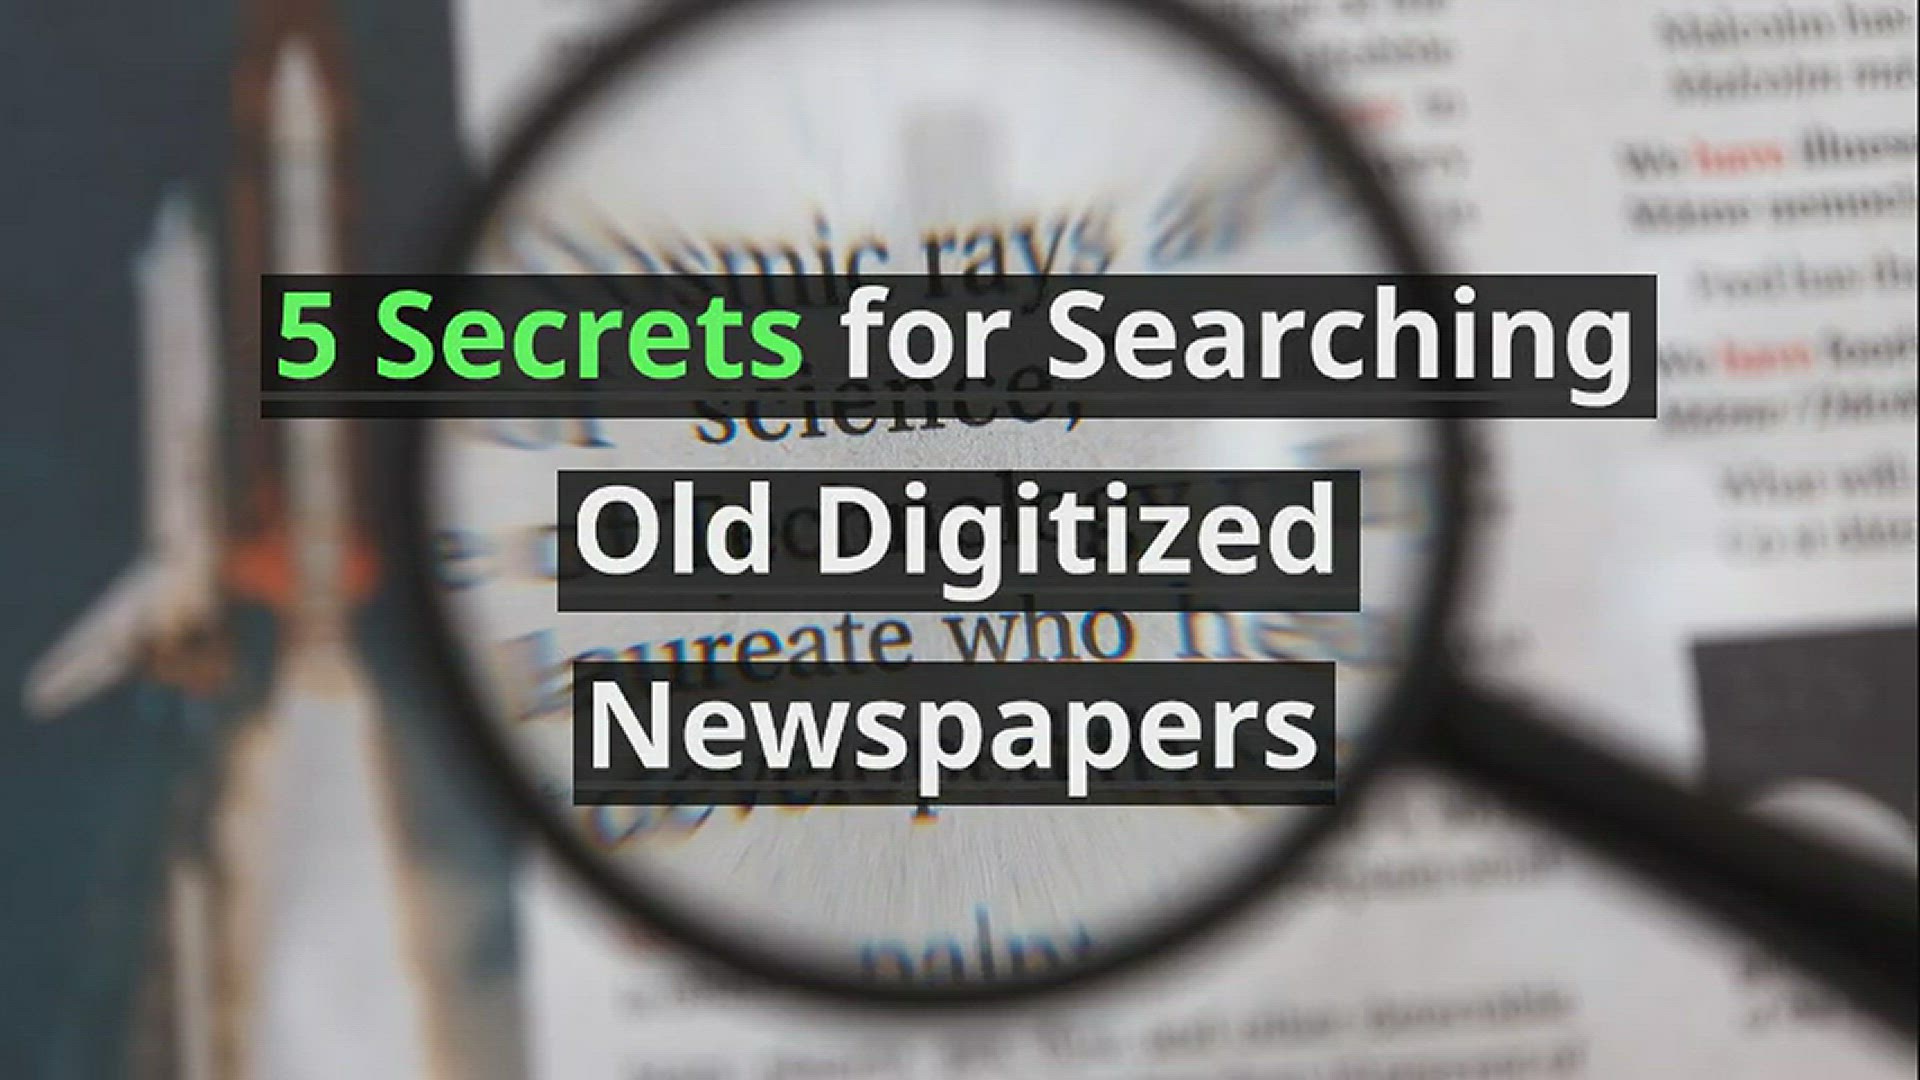 'Video thumbnail for 5 Secrets for Searching Old Digitized Newspapers'